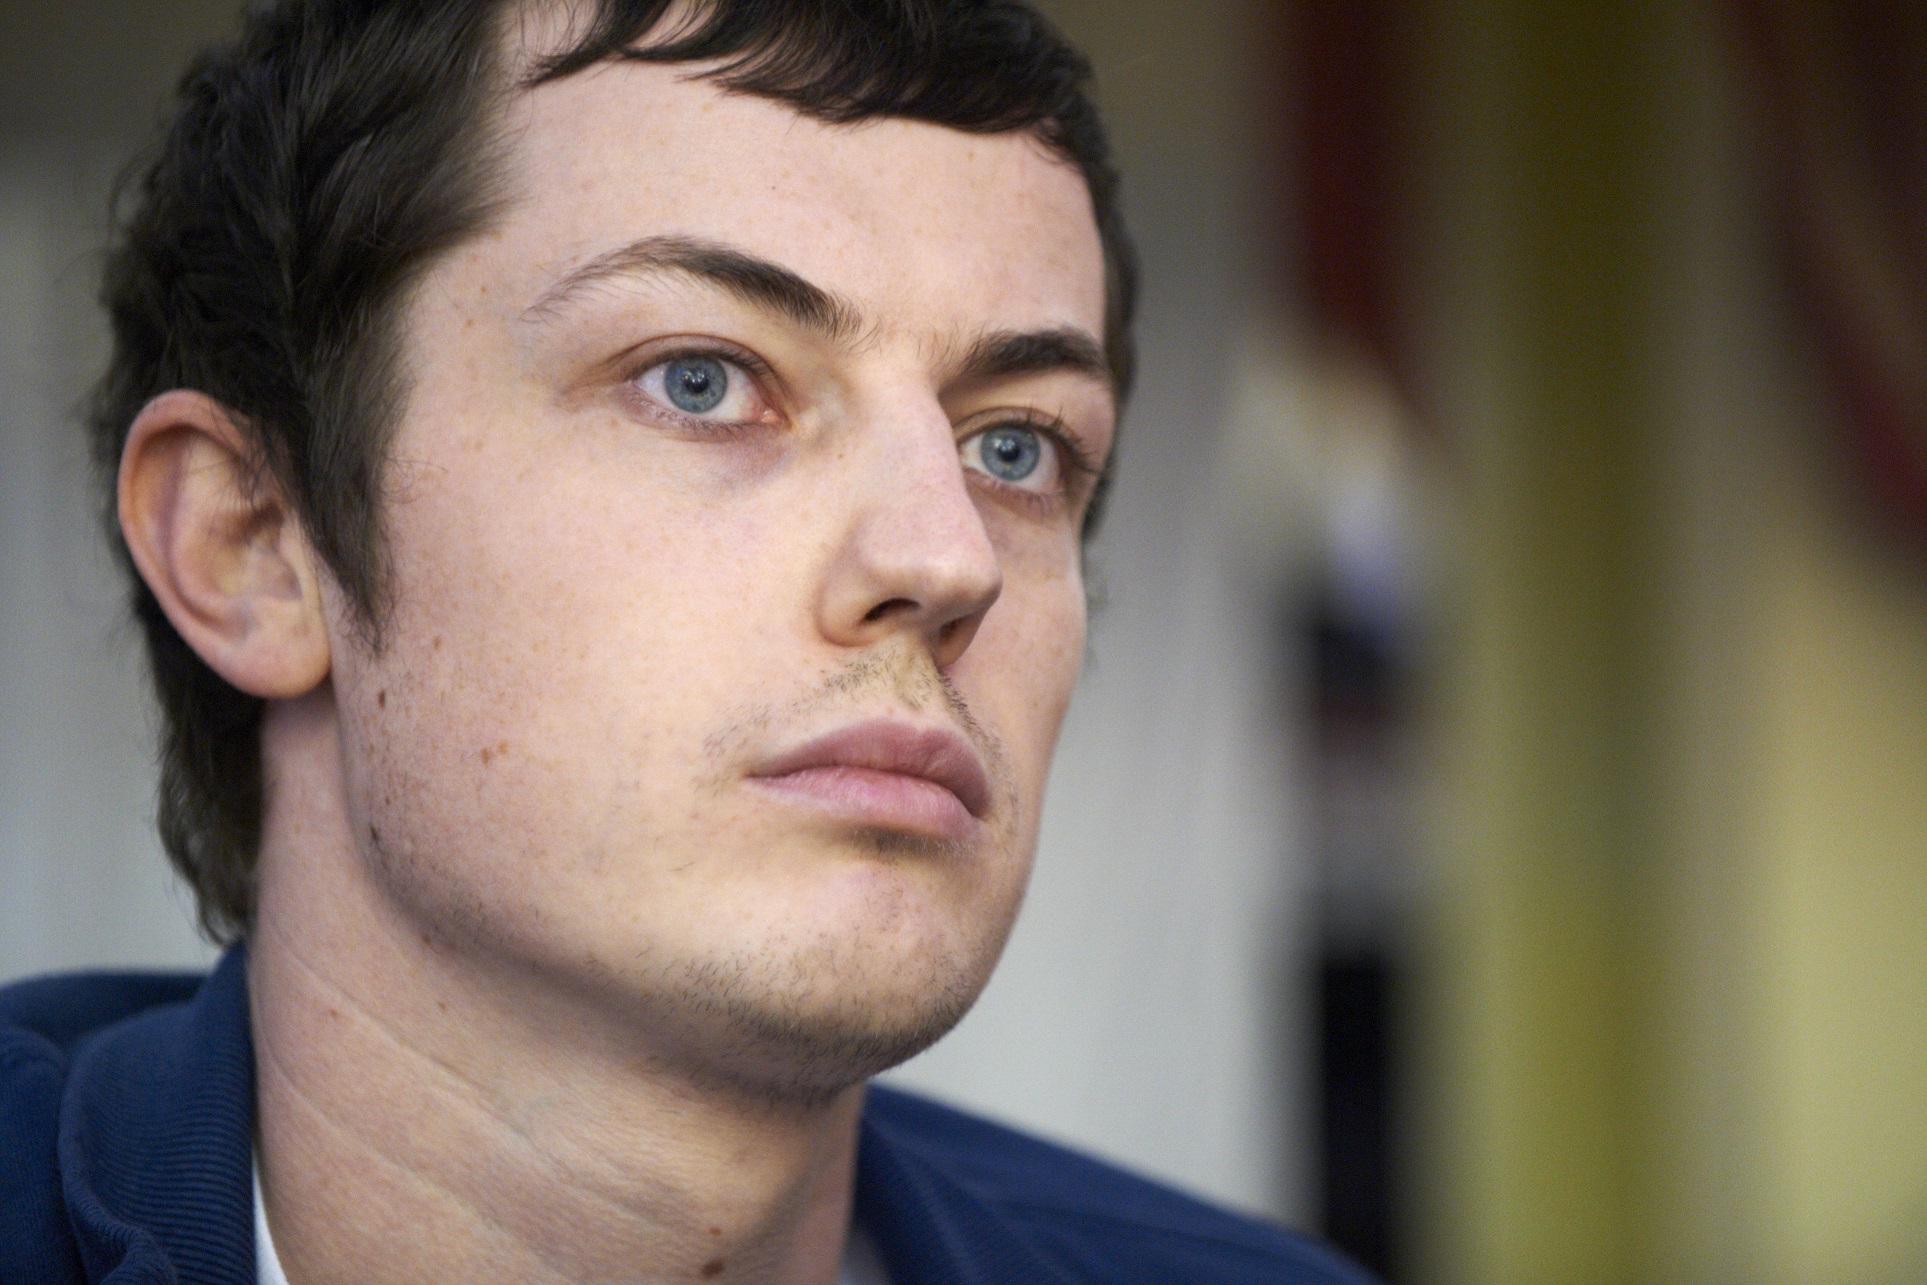 Tom Dwan hides from US authorities?